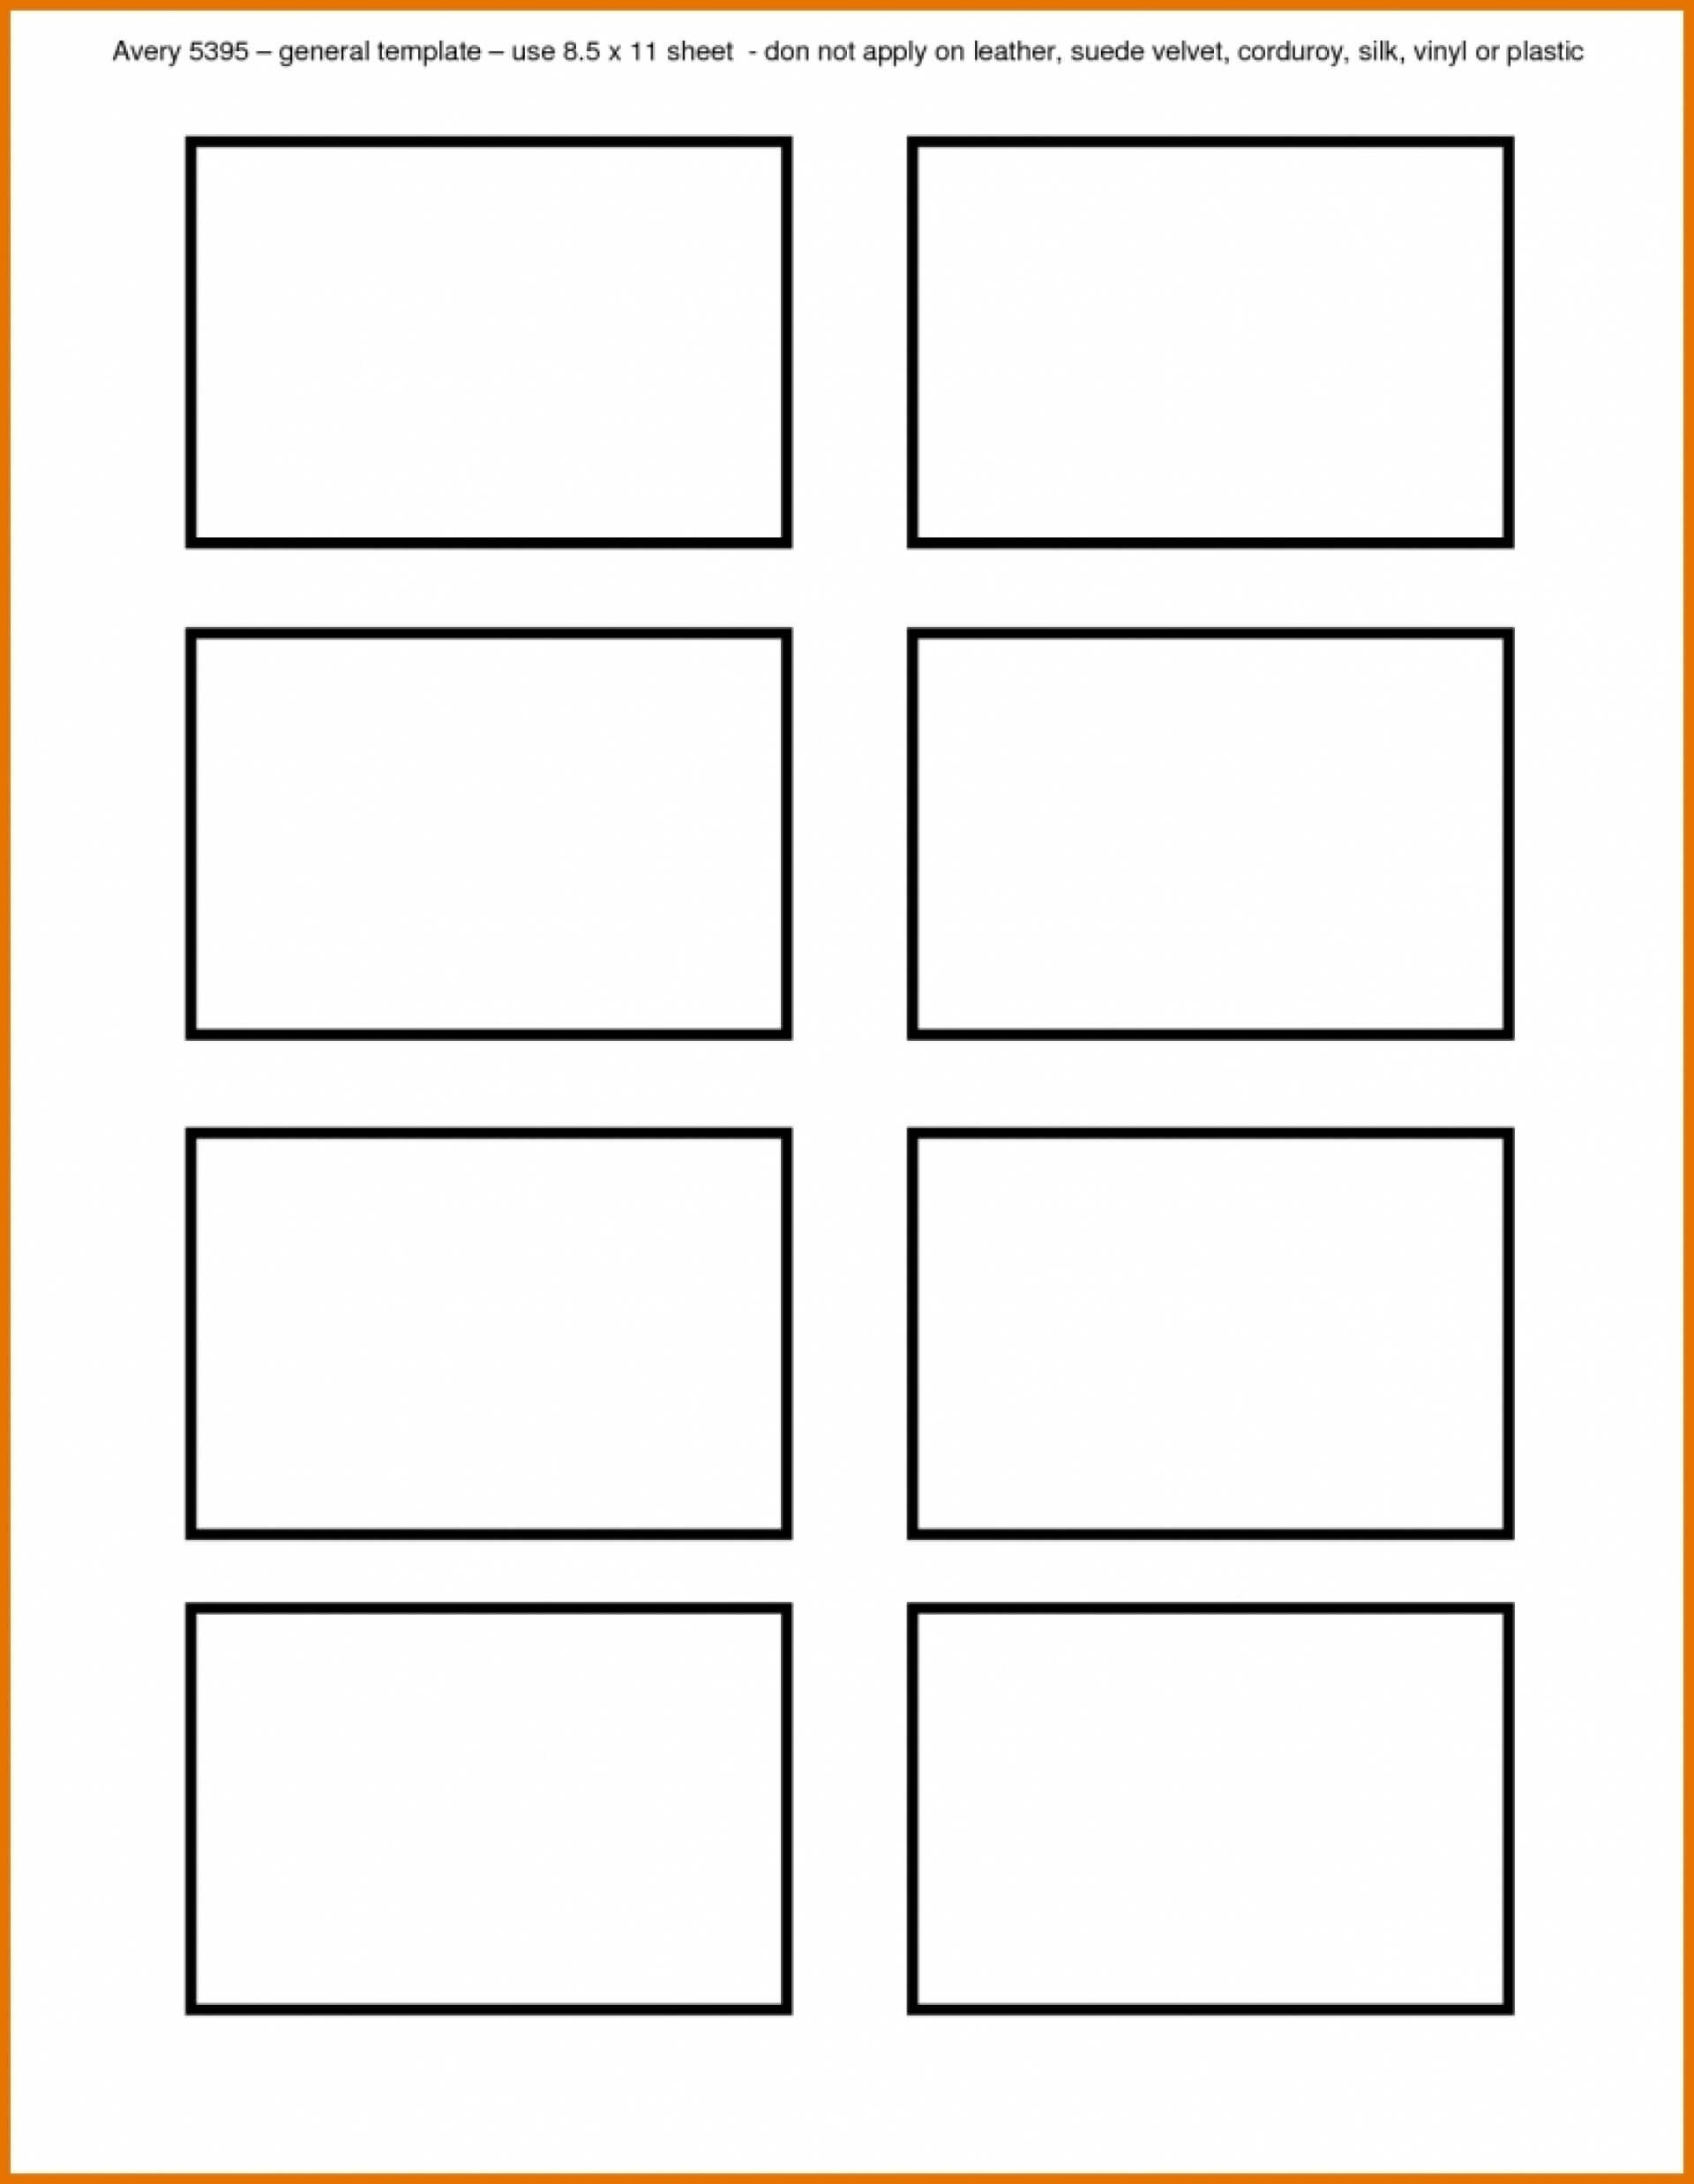 004 Free Printable Label Templates For Word Create Labels For Free Label Templates For Word